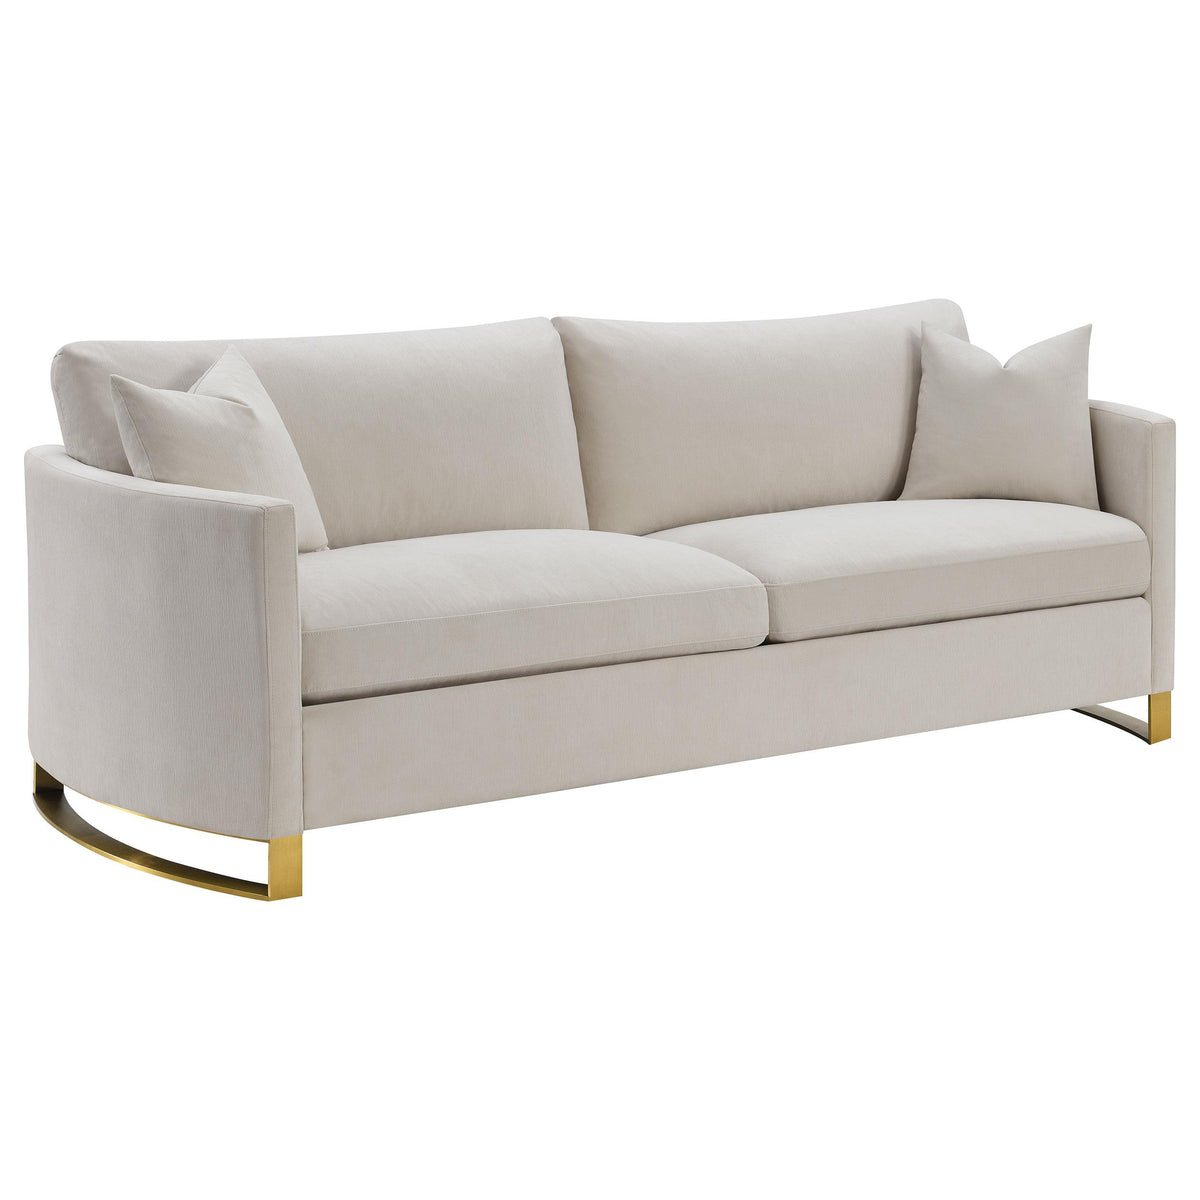 Corliss Upholstered Arched Arms Sofa Beige  Las Vegas Furniture Stores